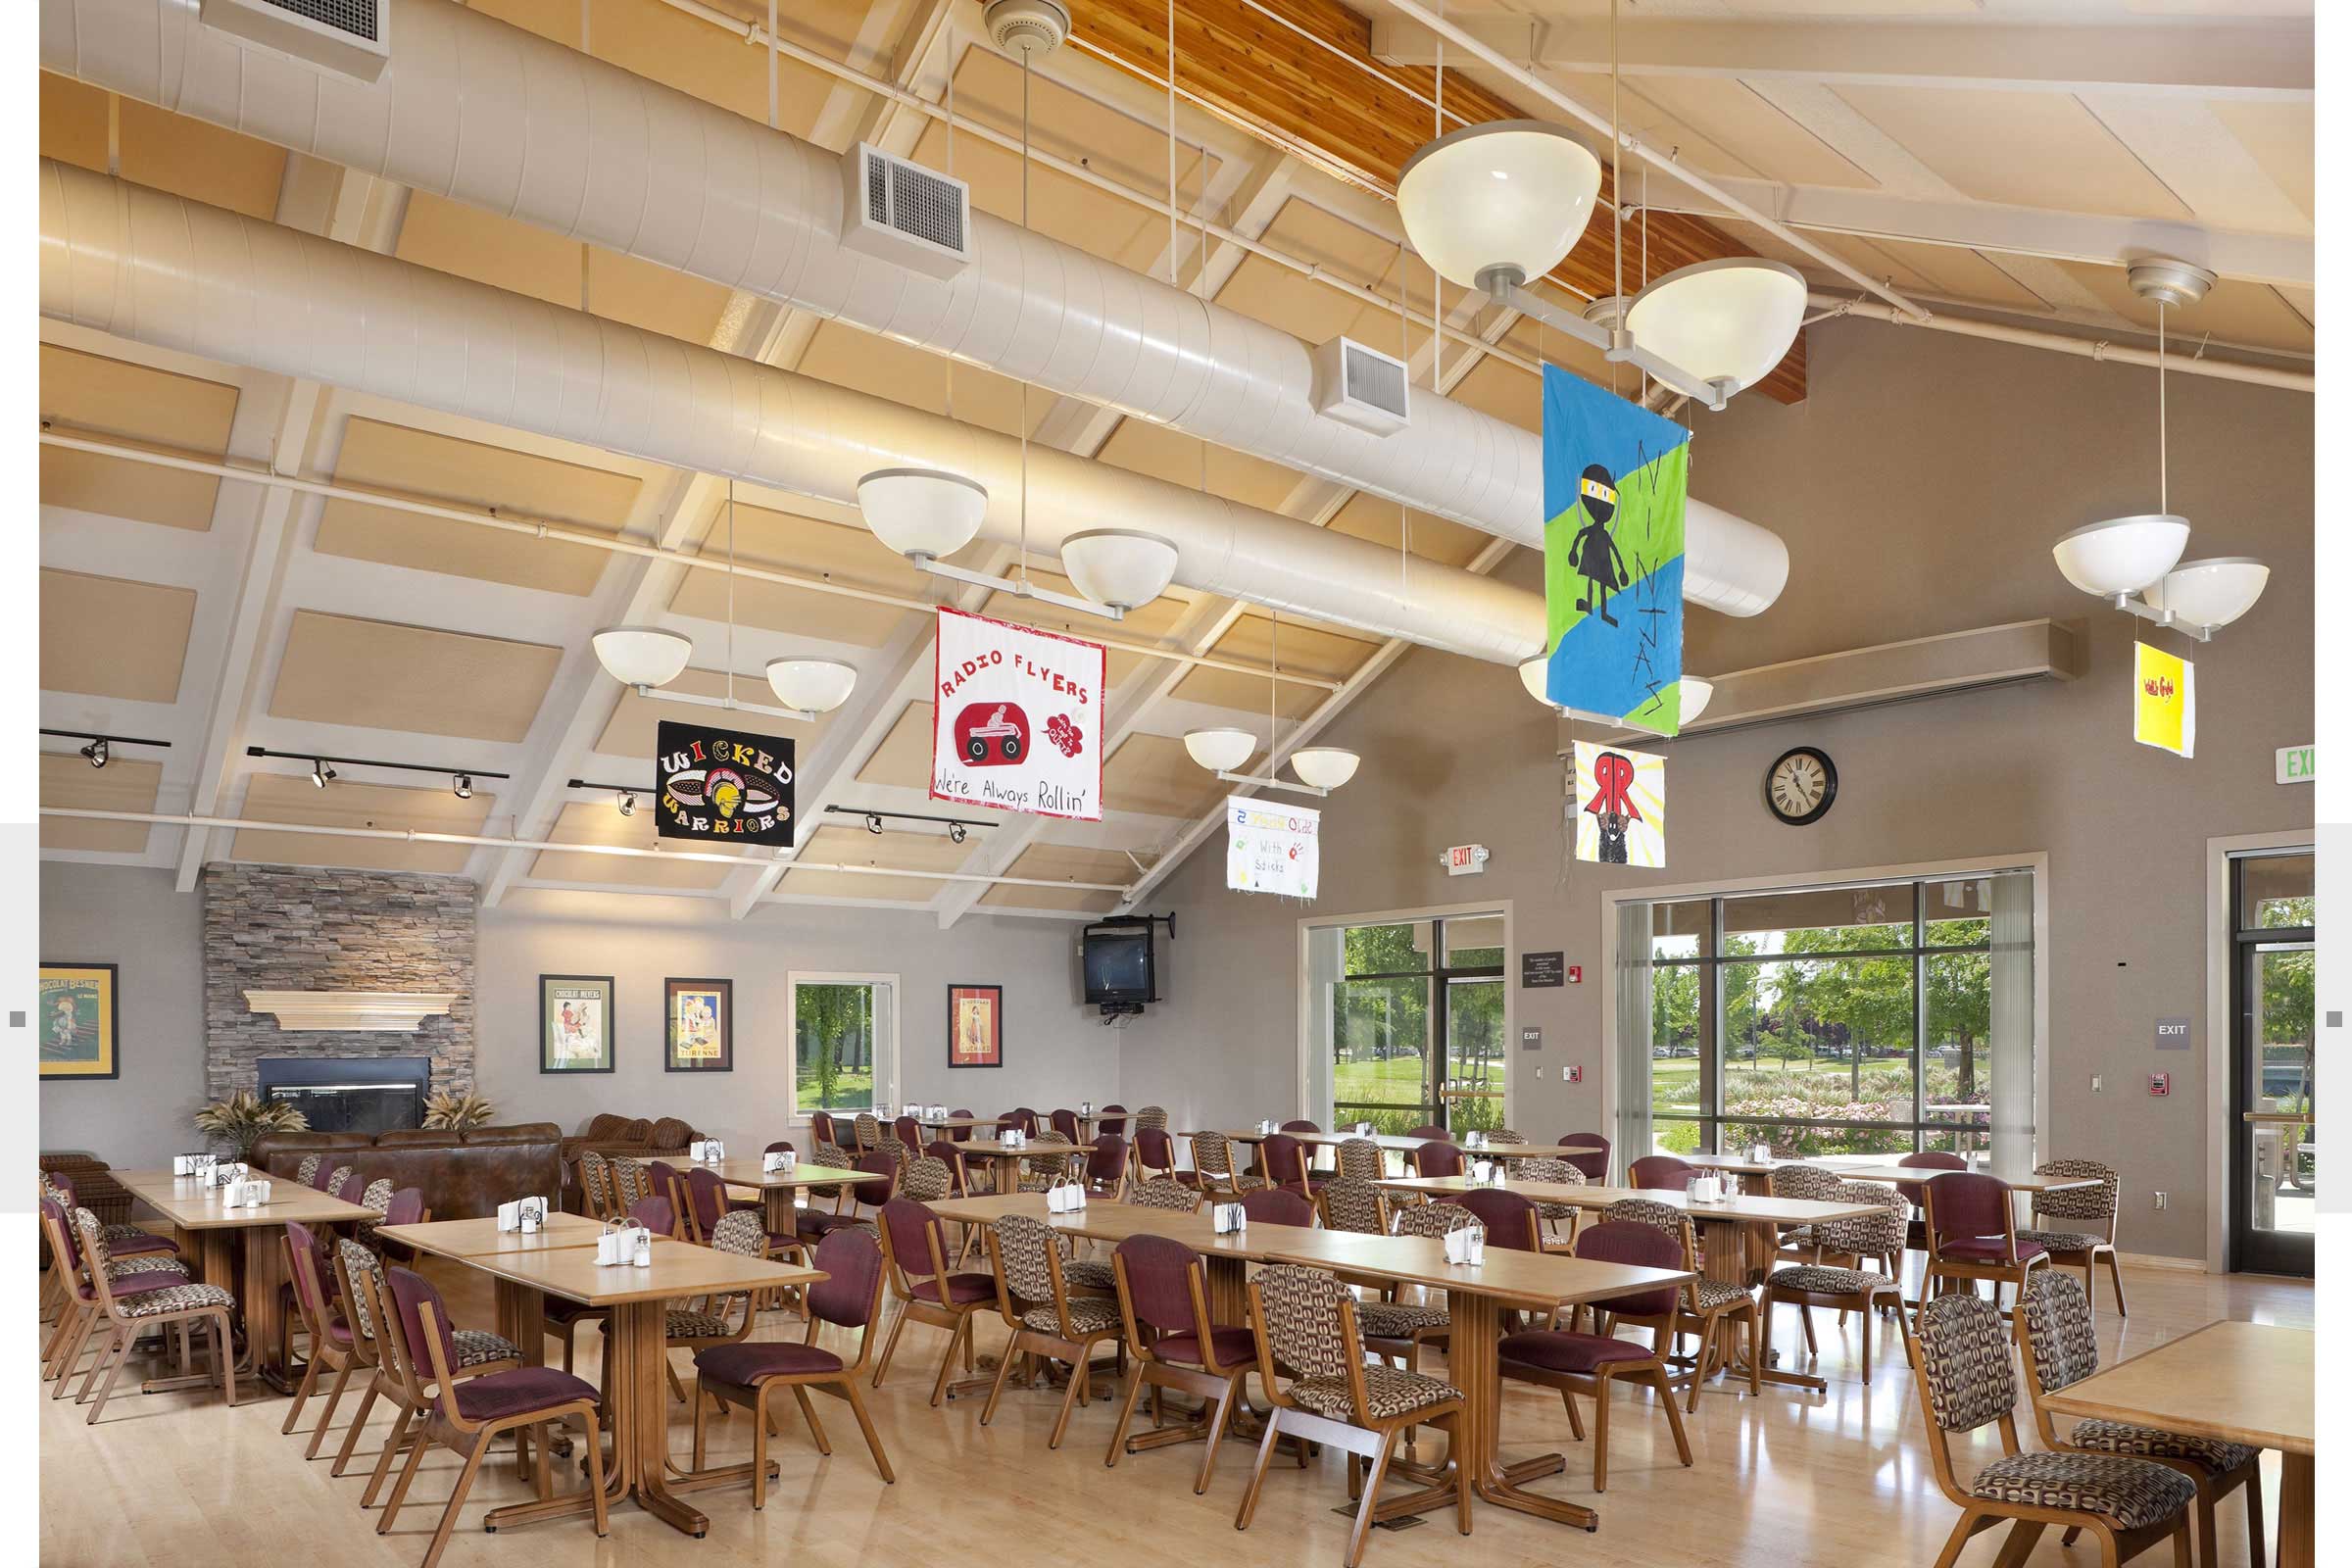 CSU dining area with soaring ceilings